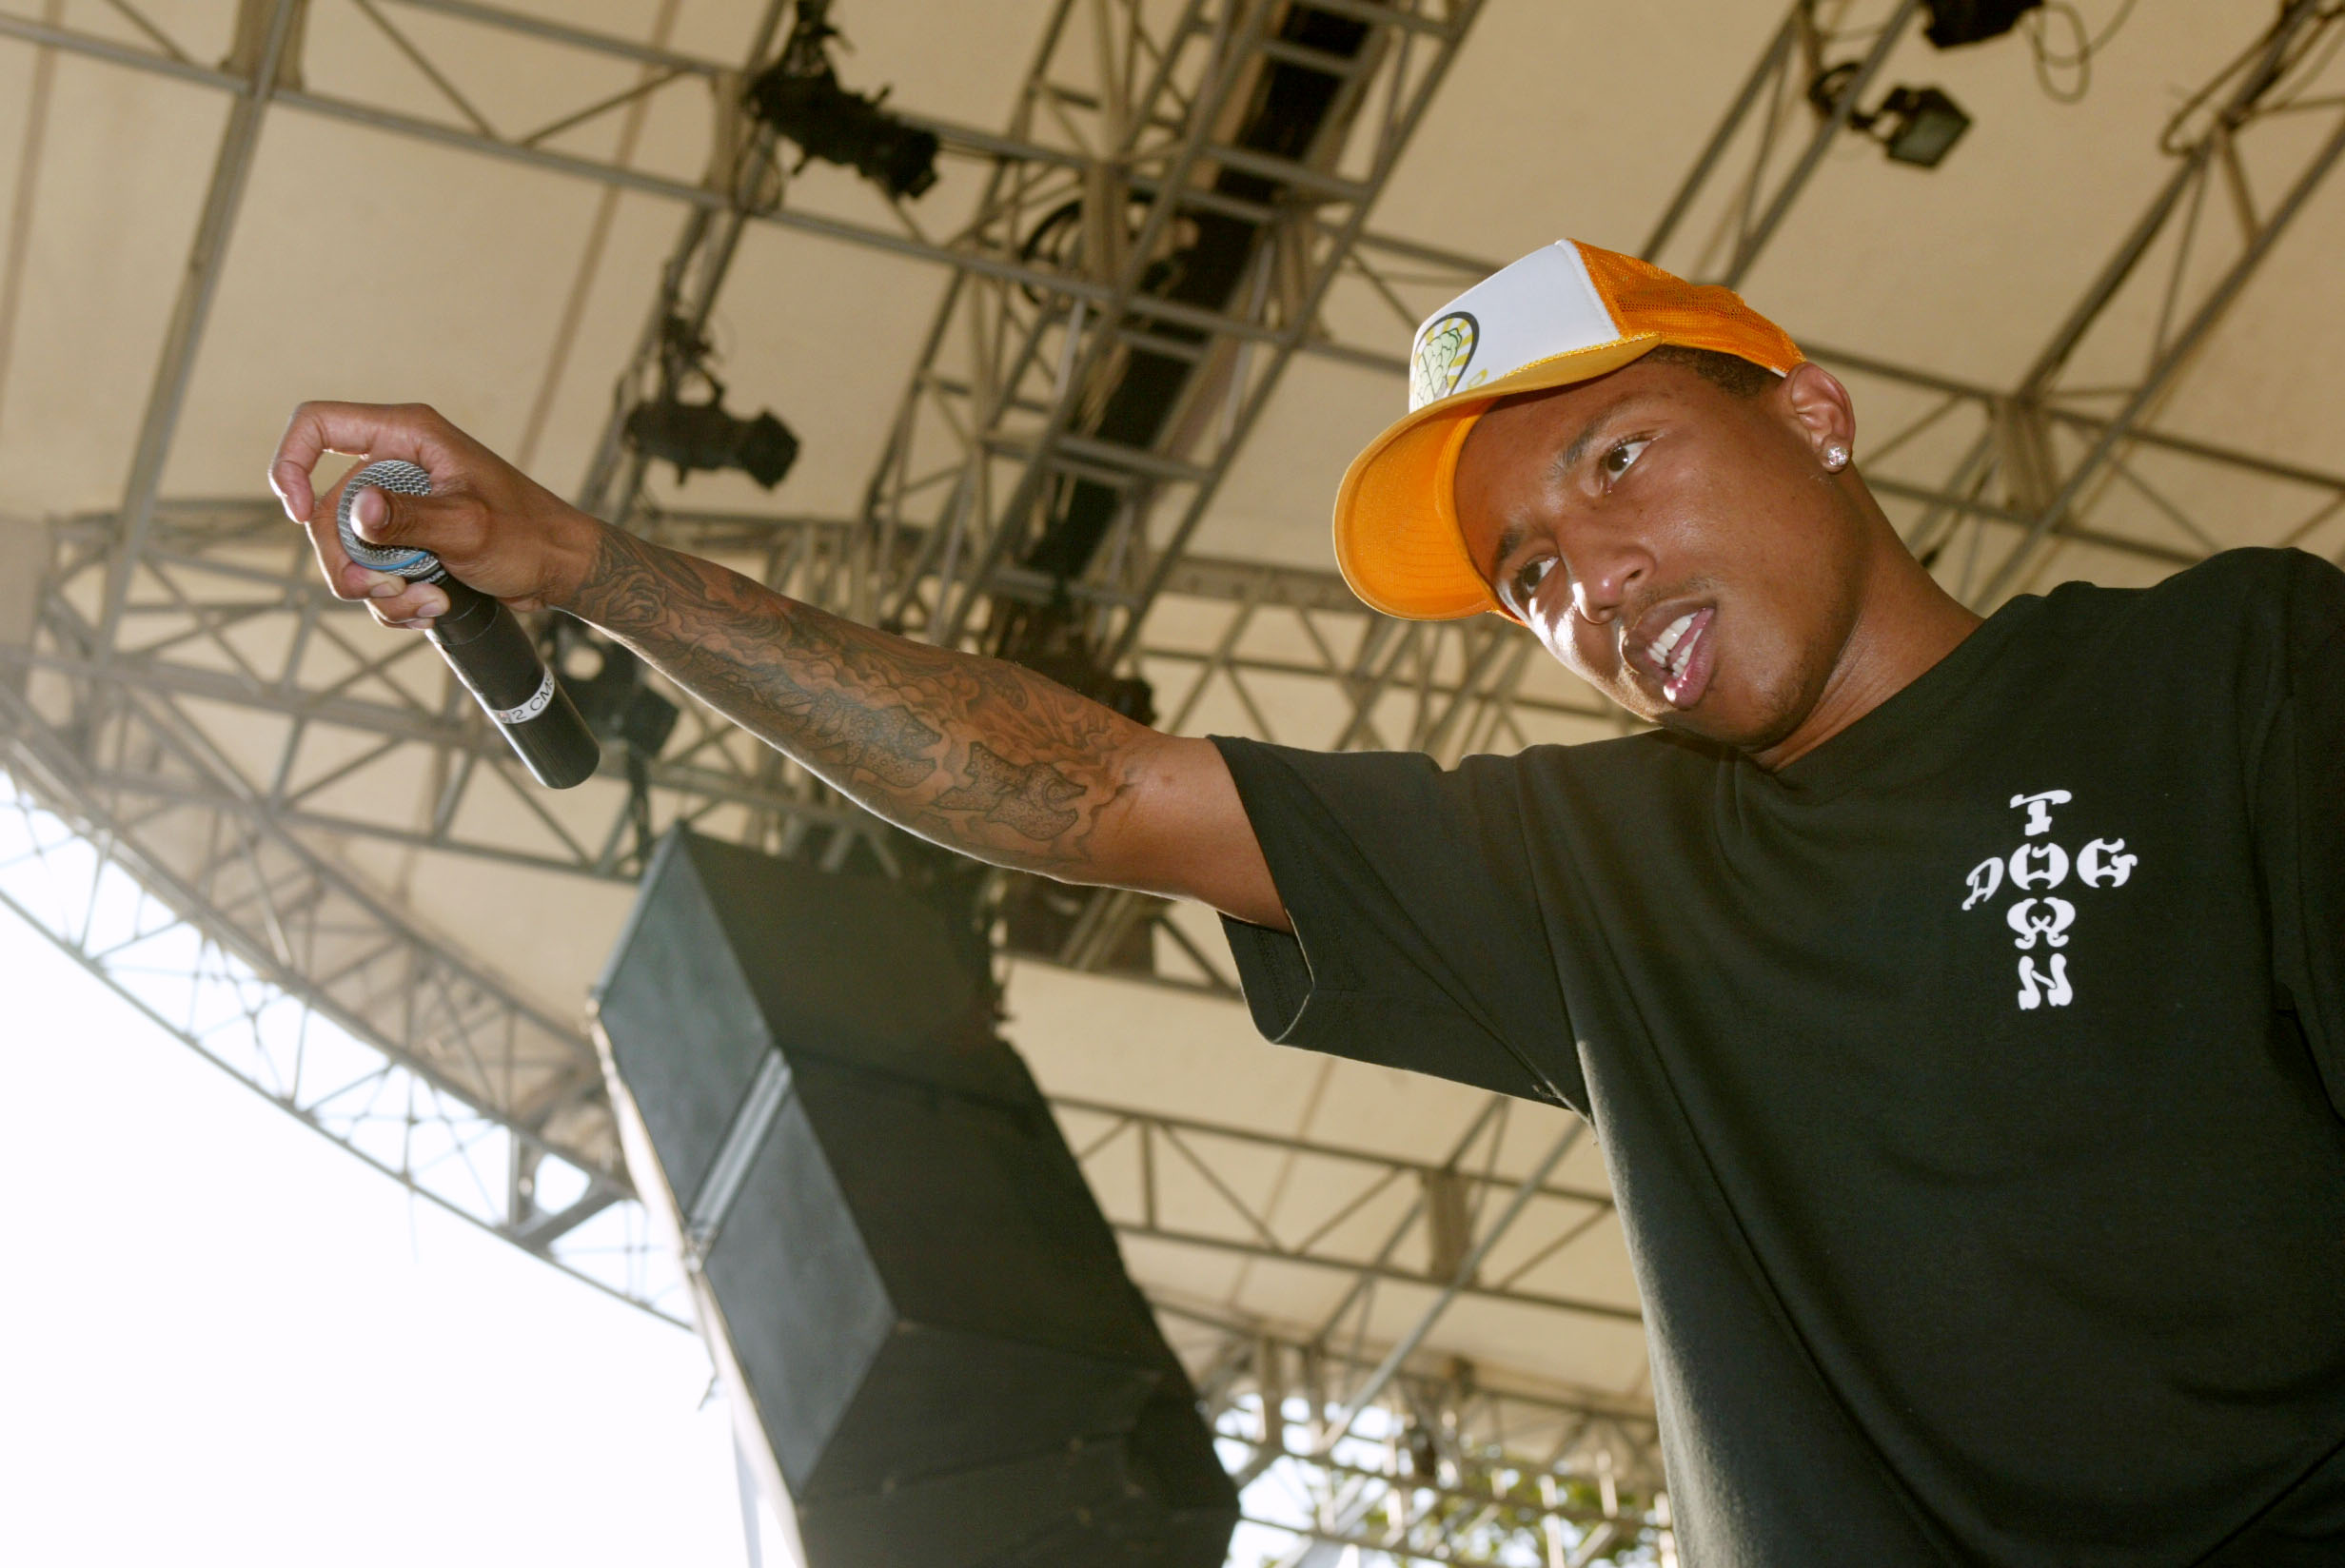 N.E.R.D. Reissuing Both Versions of Debut Album 'In Search Of...'